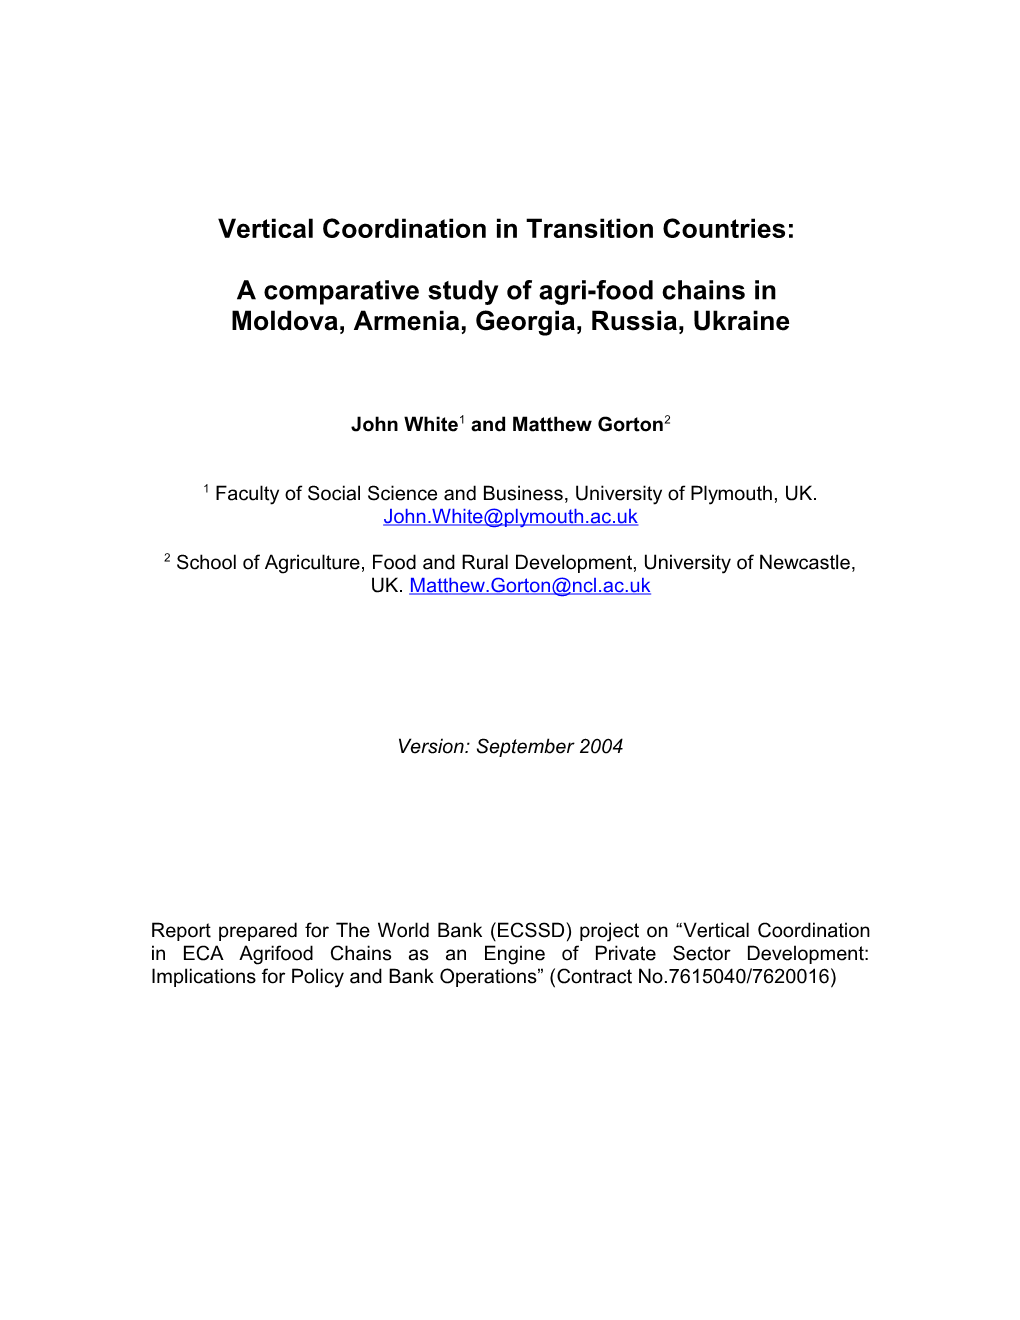 Vertical Coordination in Transition Countries